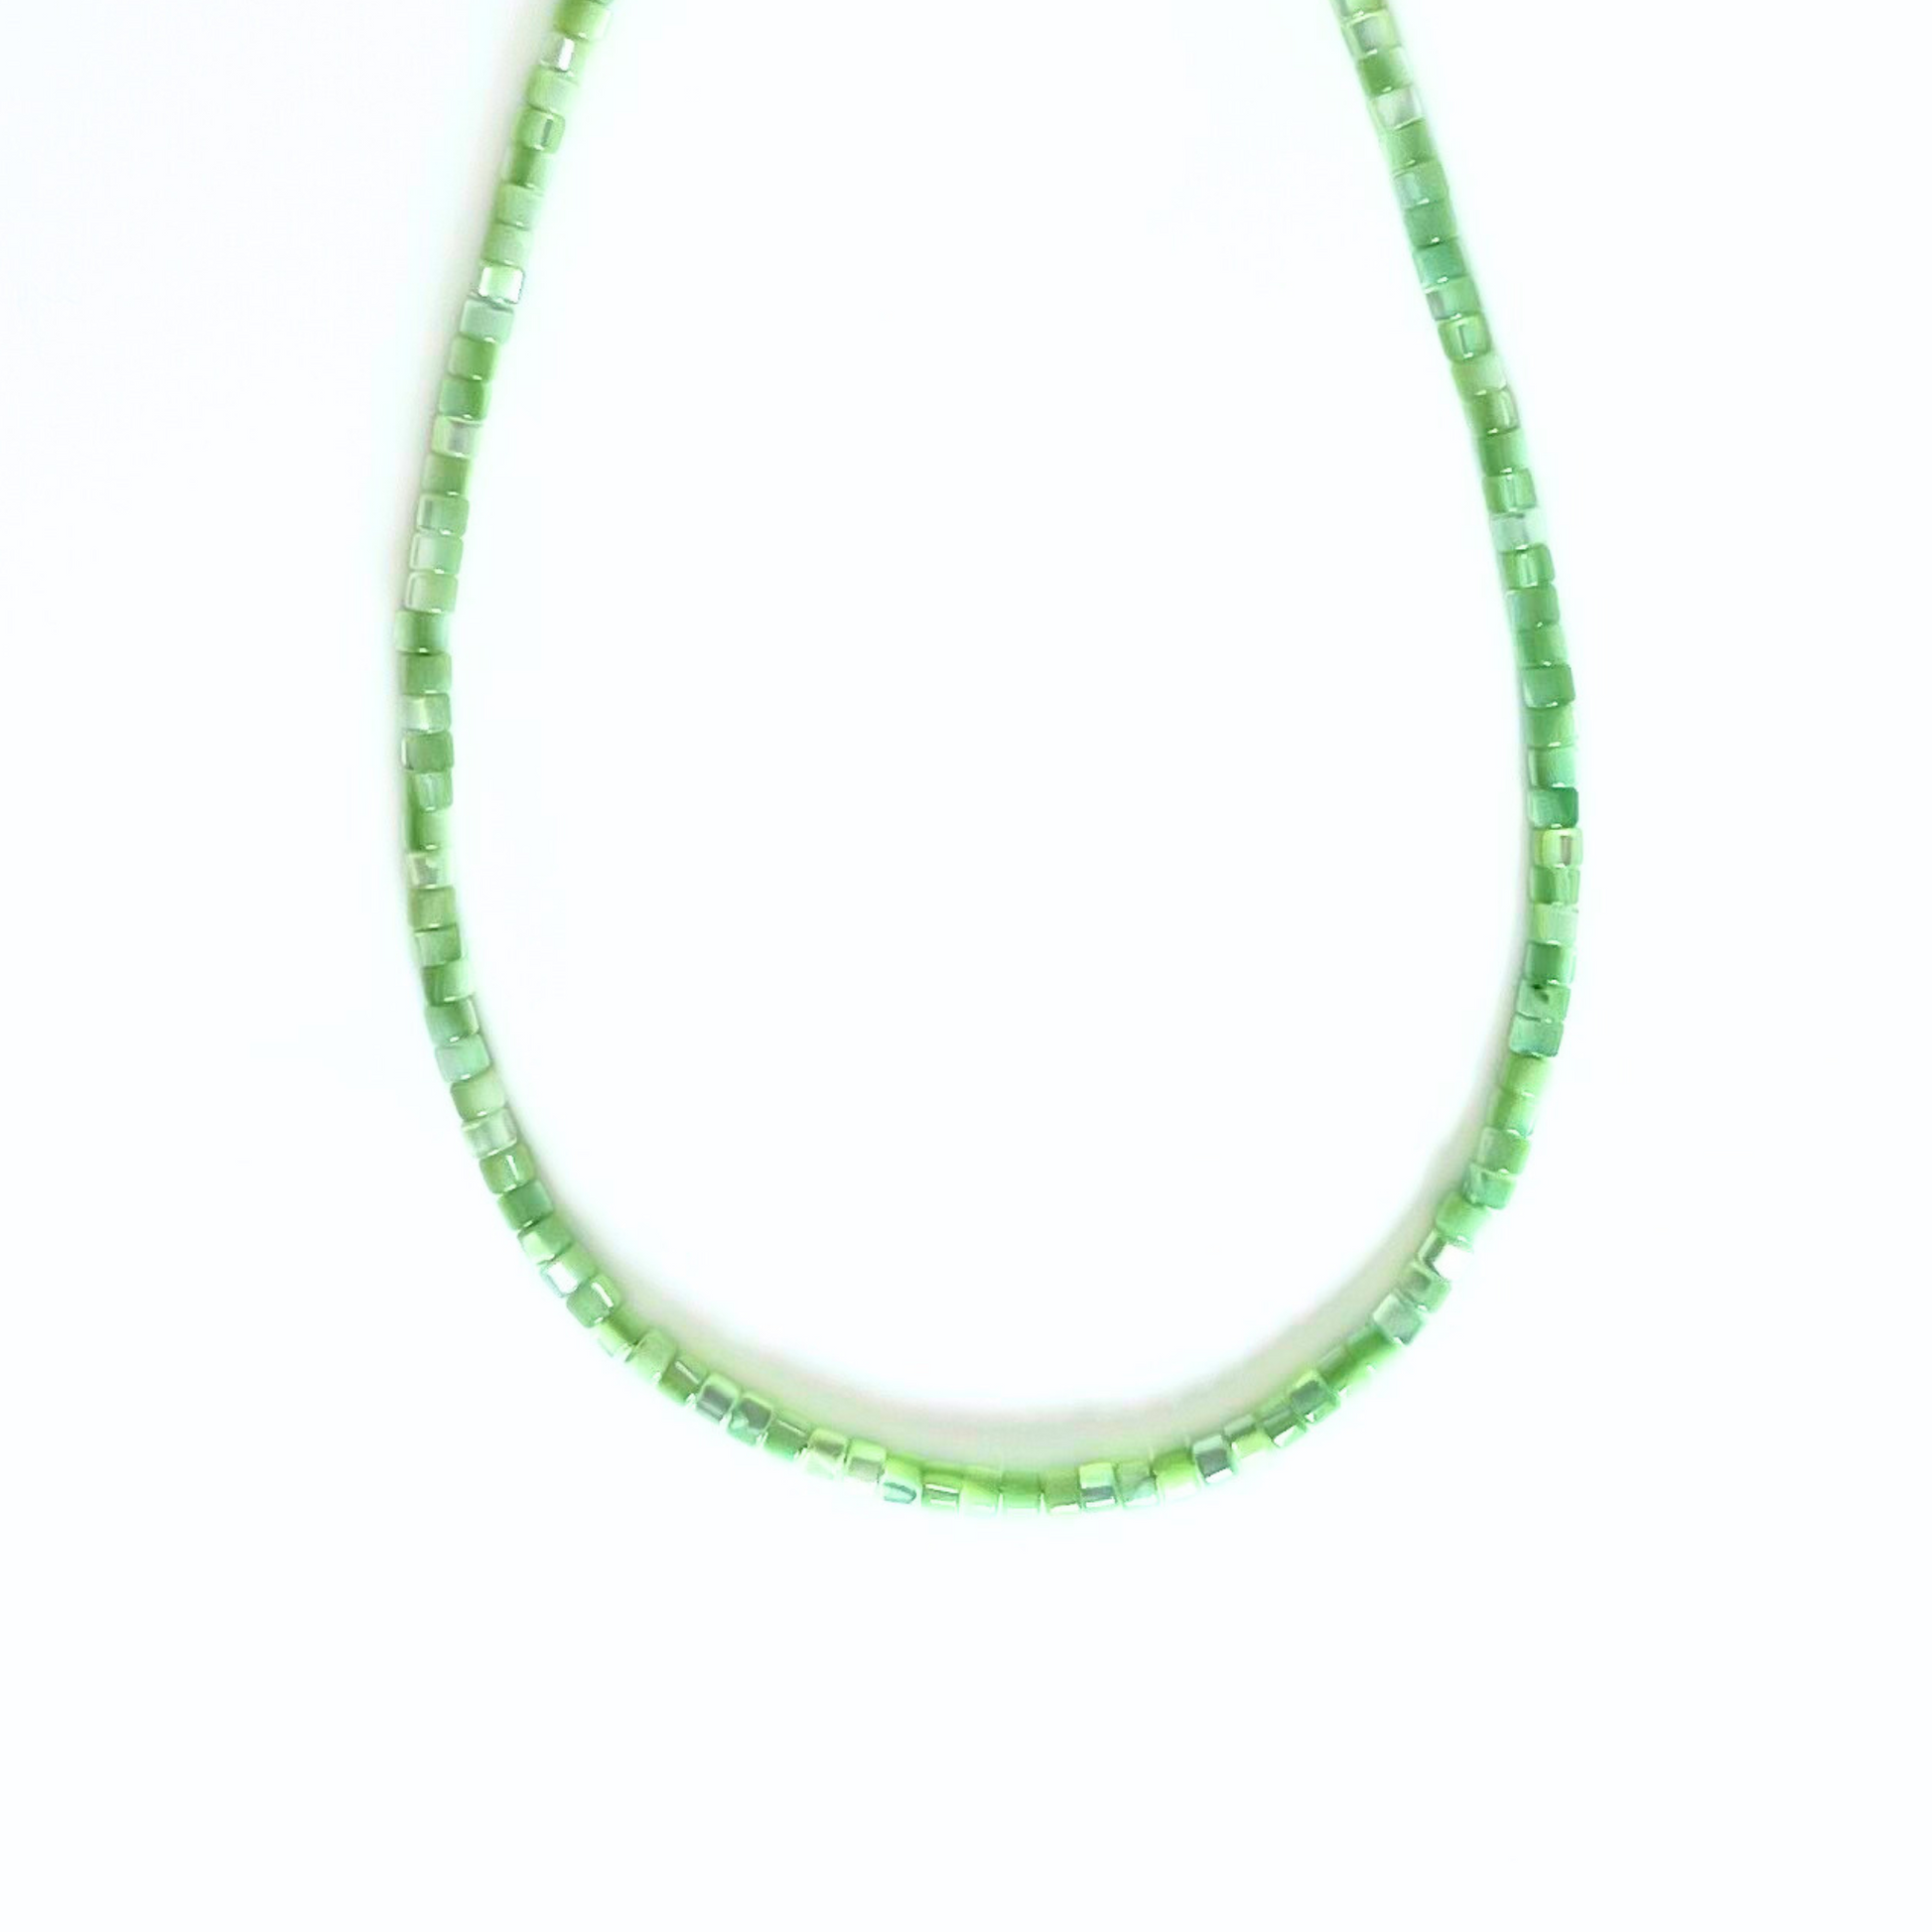 Sea green opal gemstone necklace, the heishi shaped beads are stunning and bright, necklace comes in 16 inches and 18 inches, the gold filled clasp and jump ring complete this necklace 